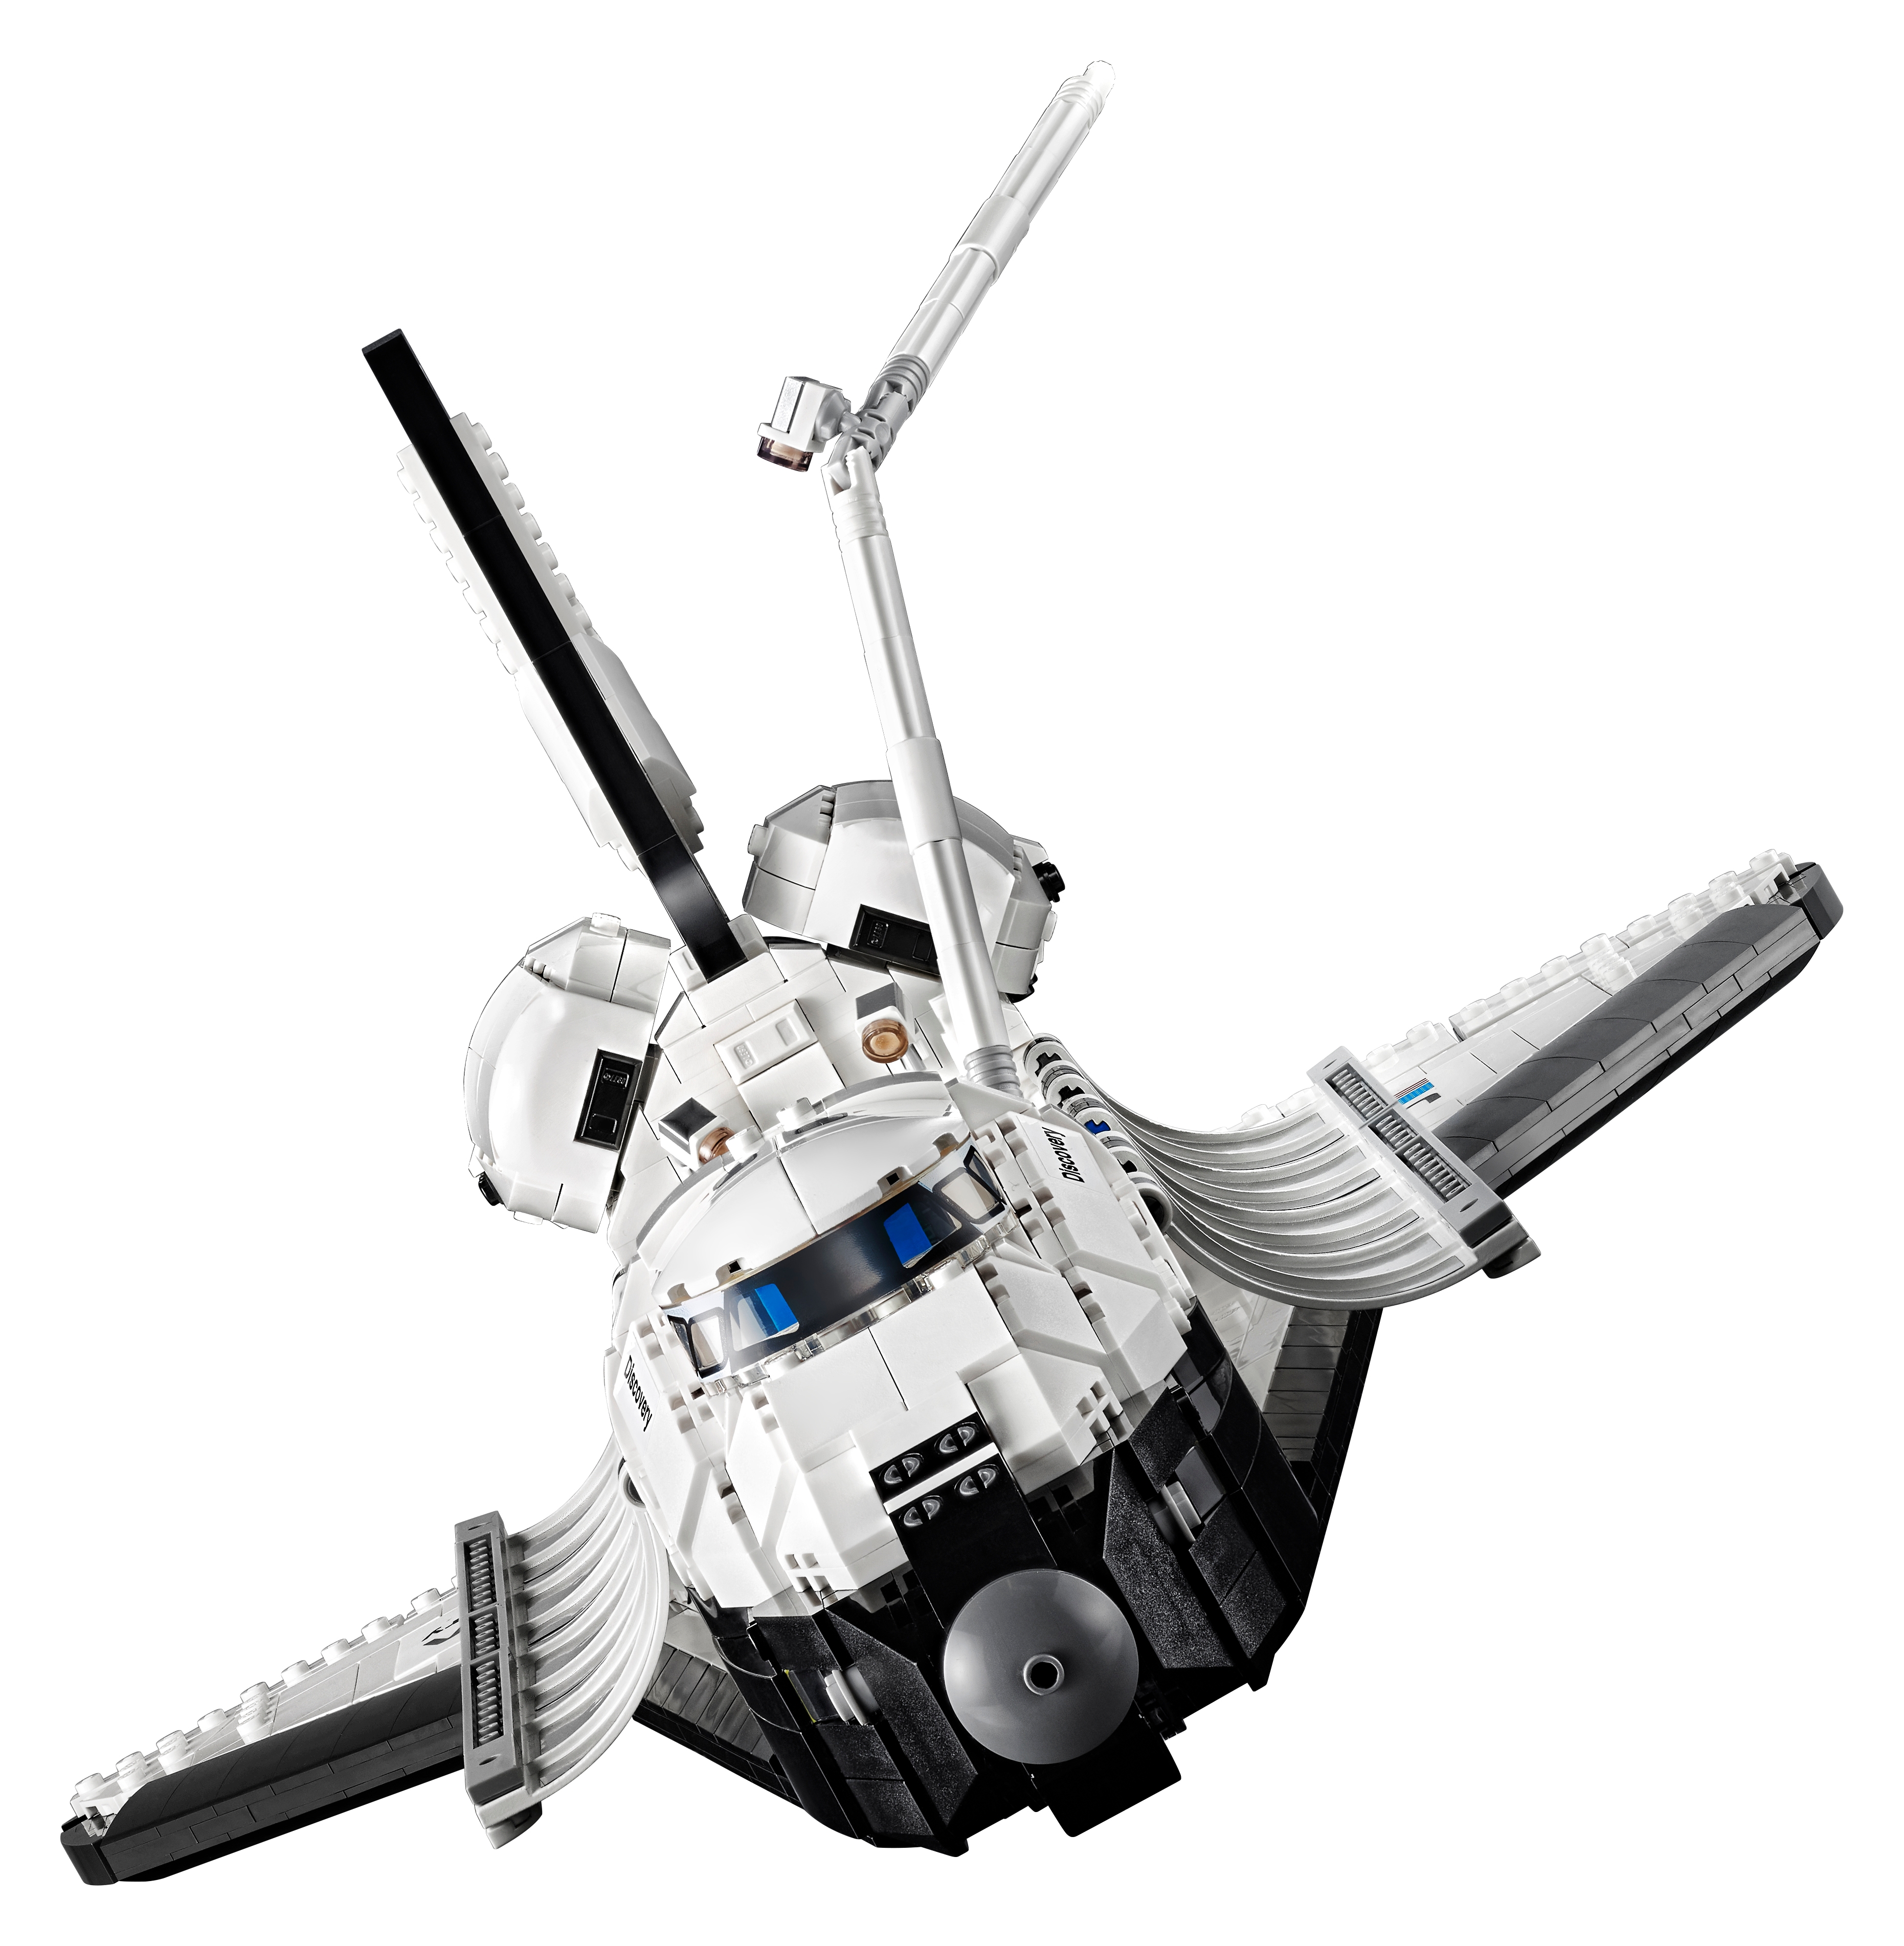 LEGO NASA 10283 Space Shuttle Discovery Set for Adults